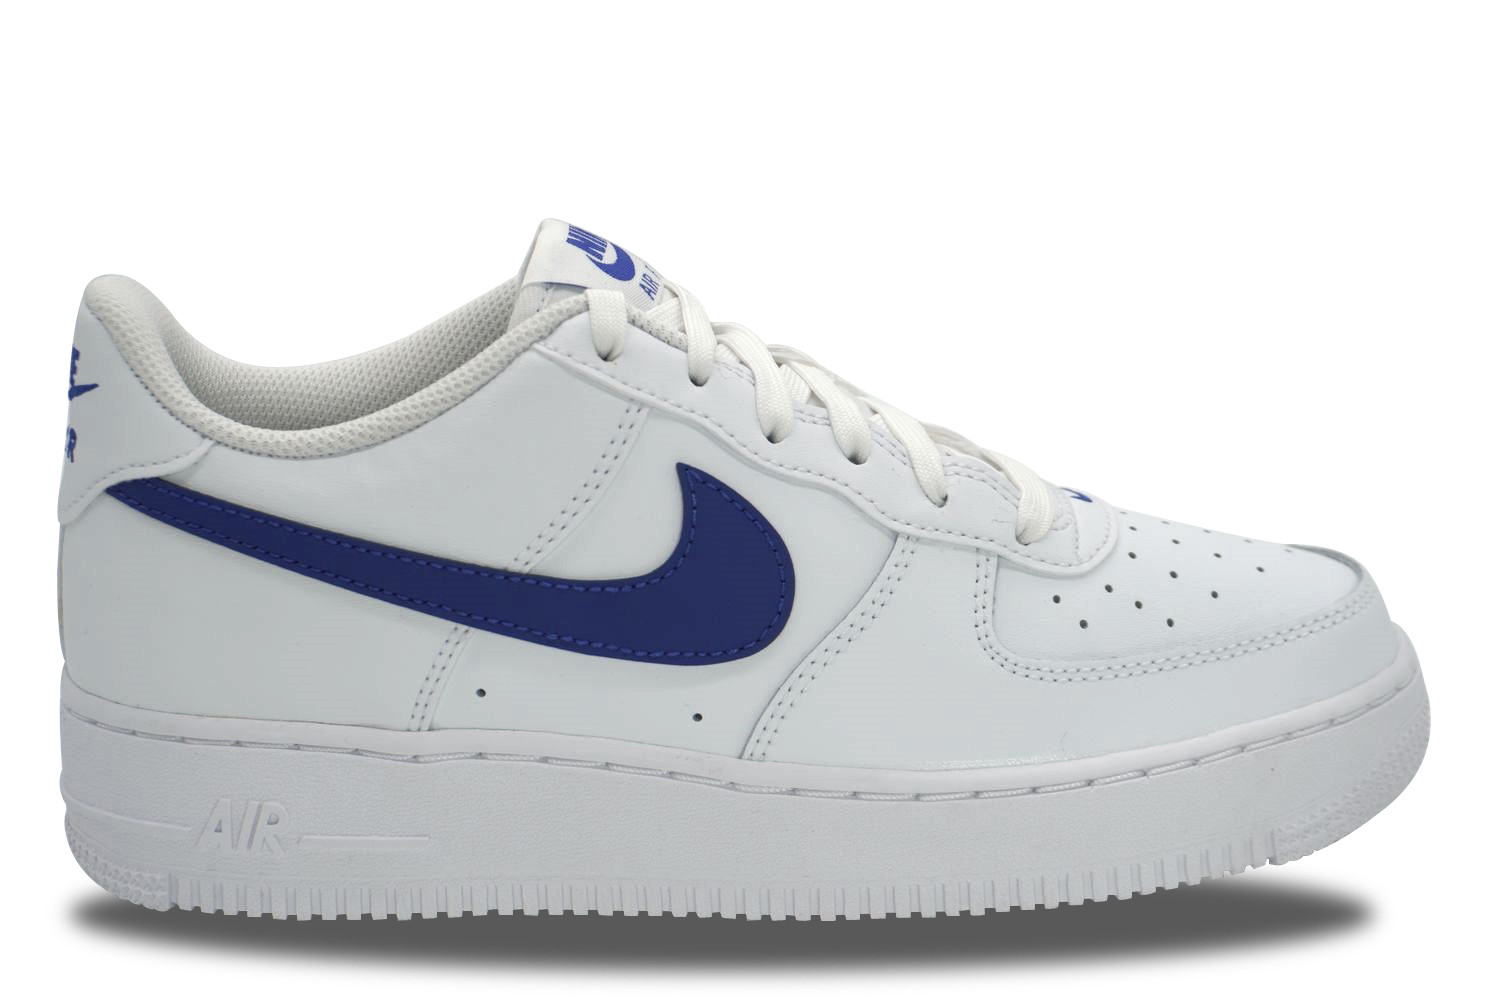 Nike Air Force 1 Leather White Hyper Royal